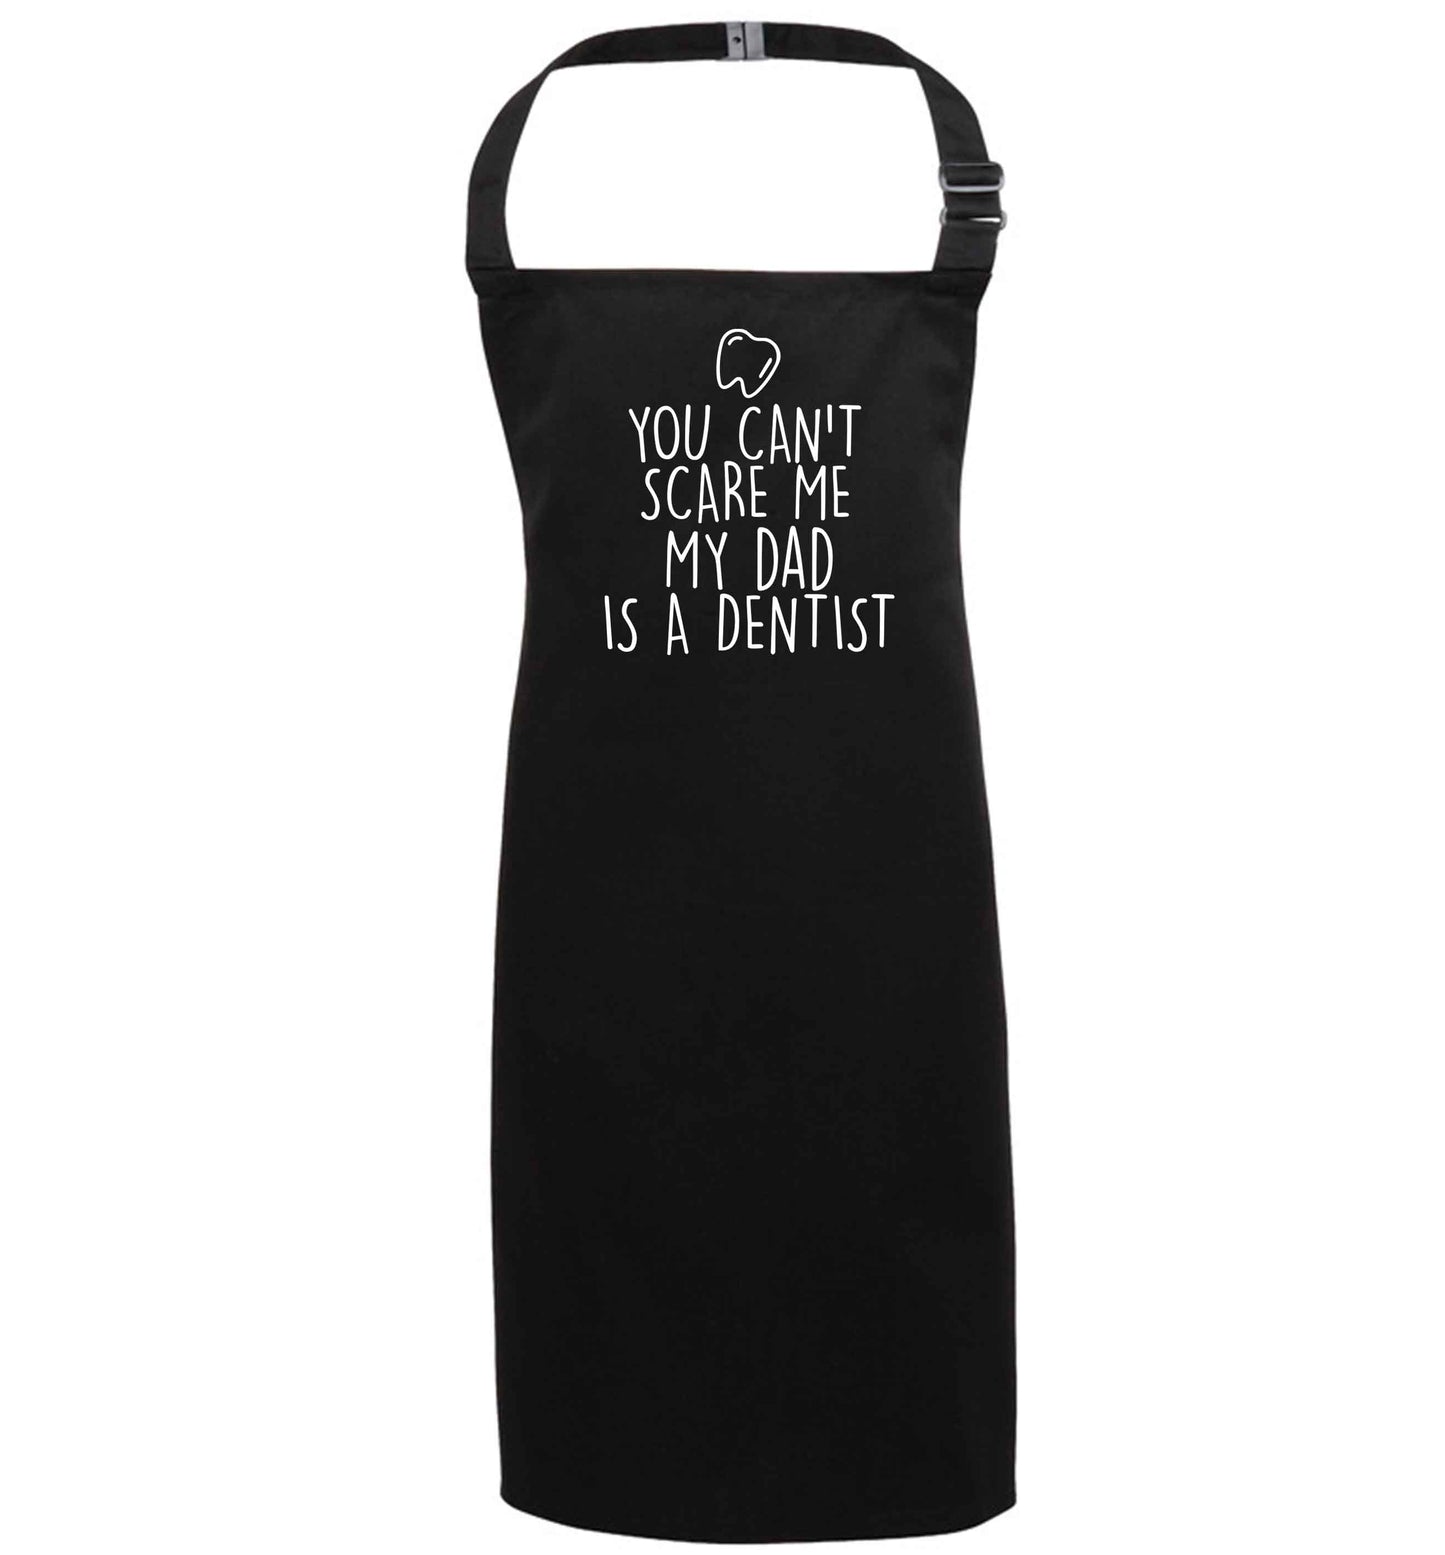 You can't scare me my dad is a dentist black apron 7-10 years